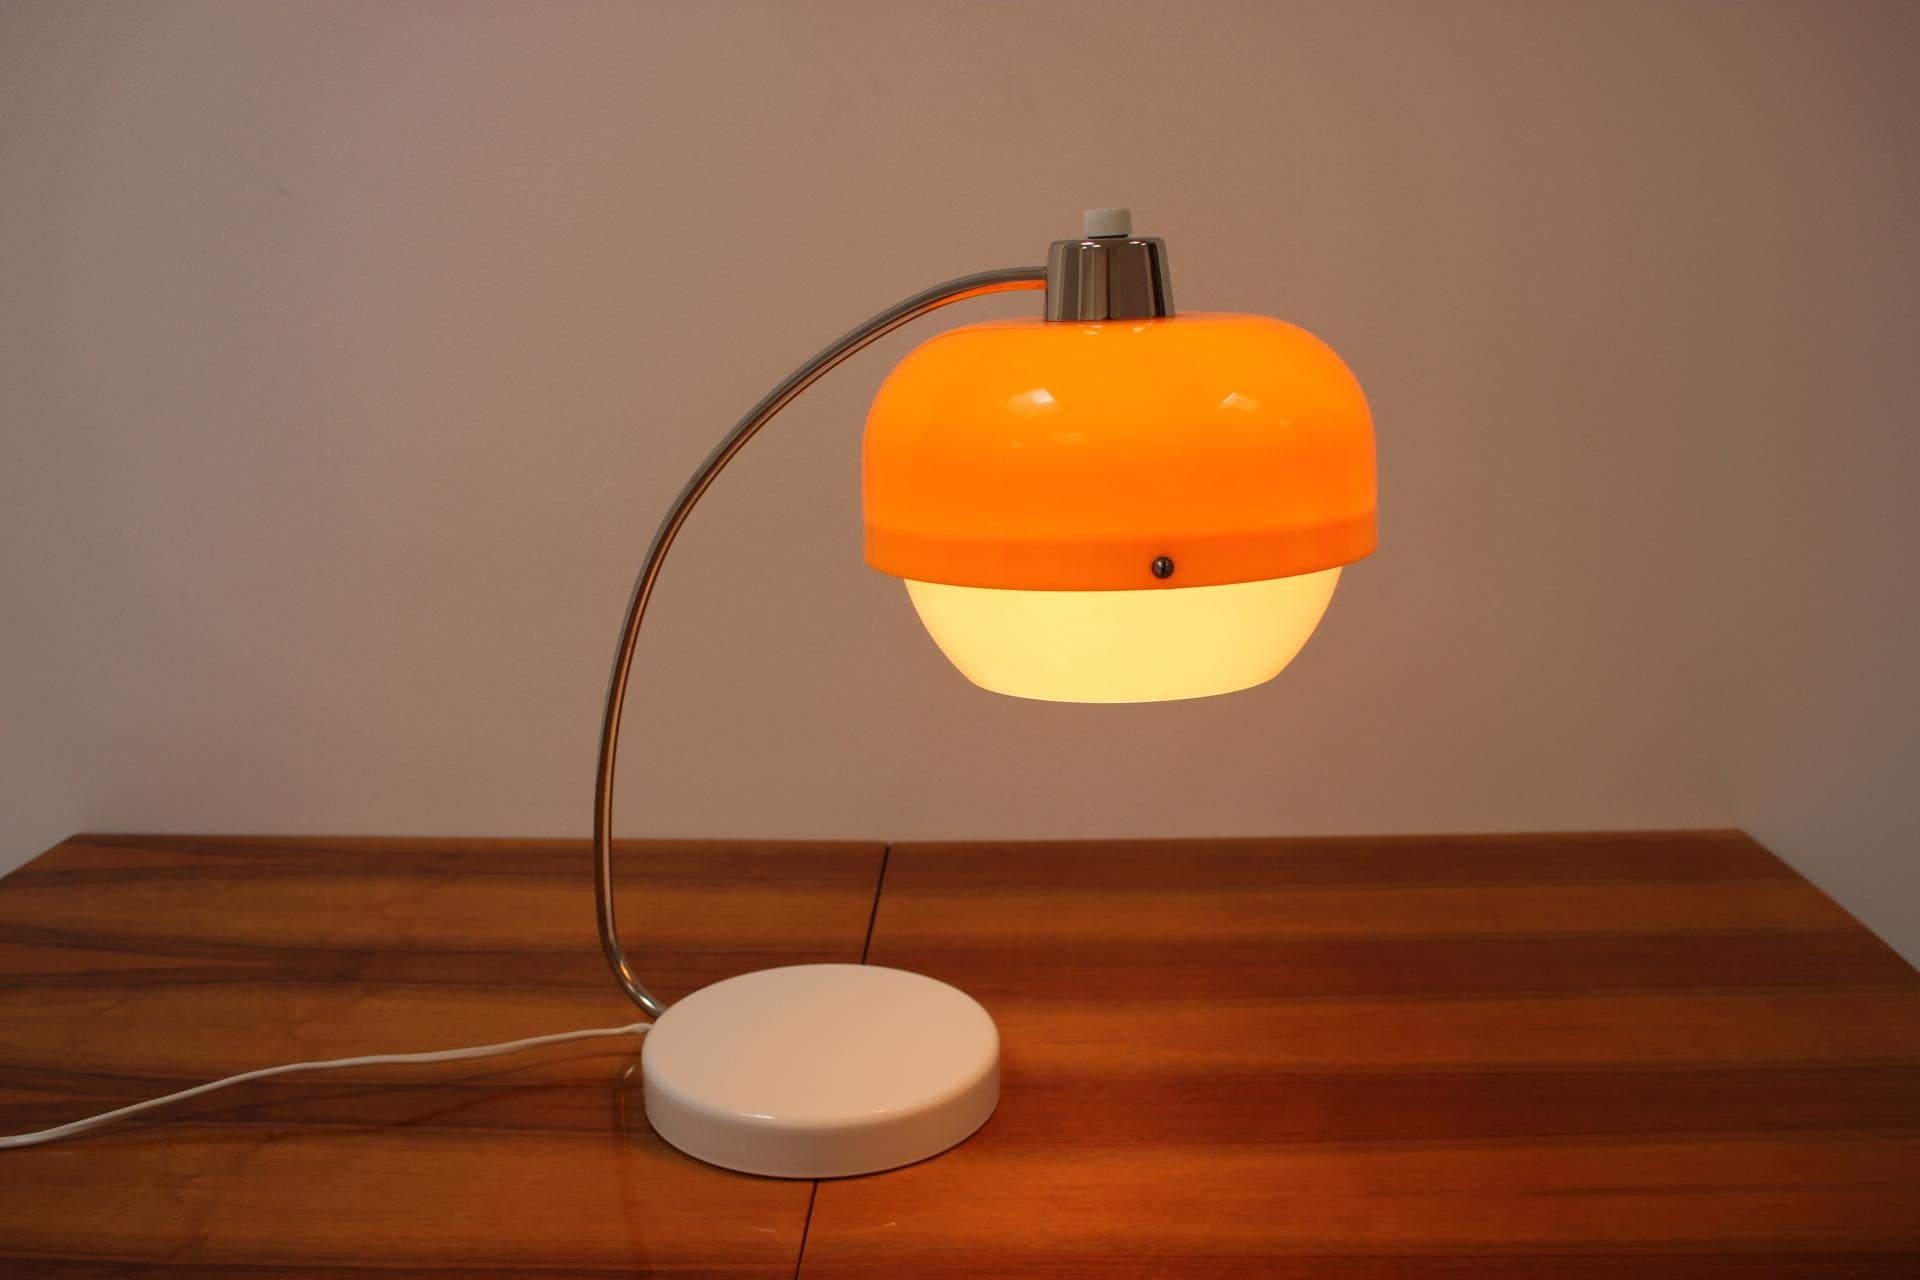 Chrome Design Table Lamp in Style of Guzzini, 1970's For Sale